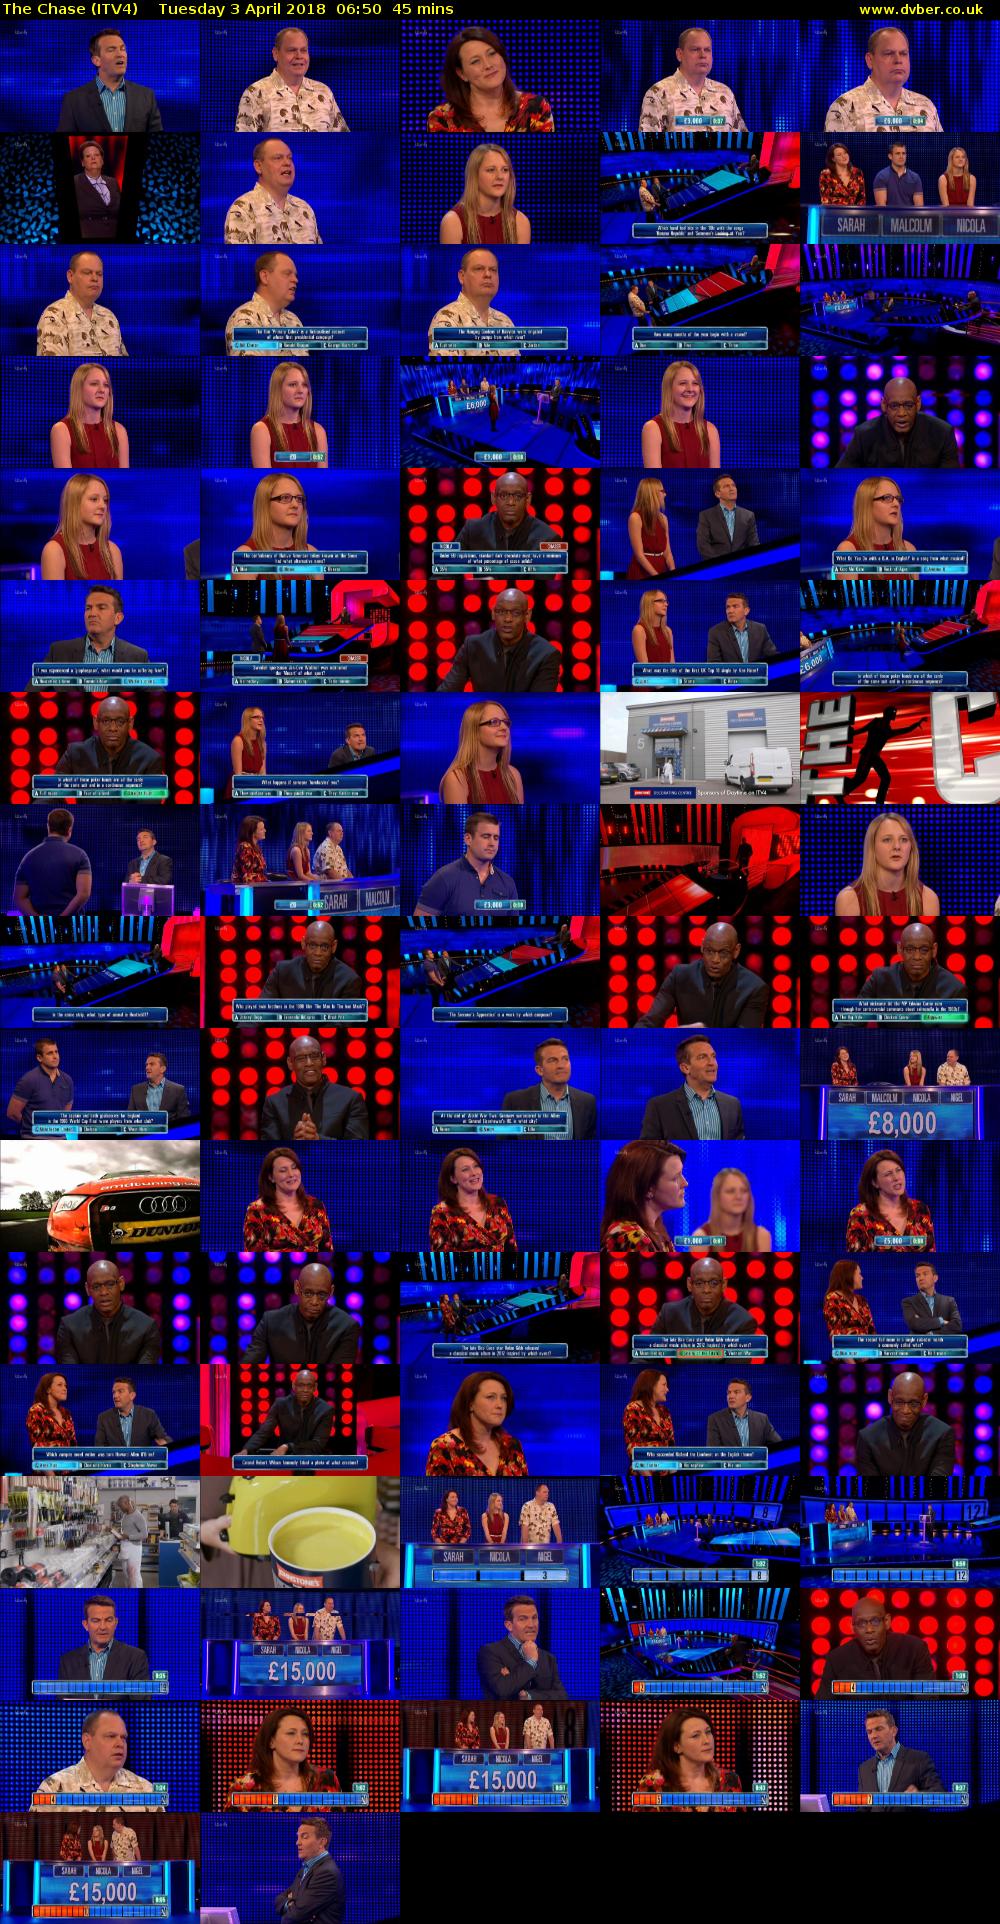 The Chase (ITV4) Tuesday 3 April 2018 06:50 - 07:35